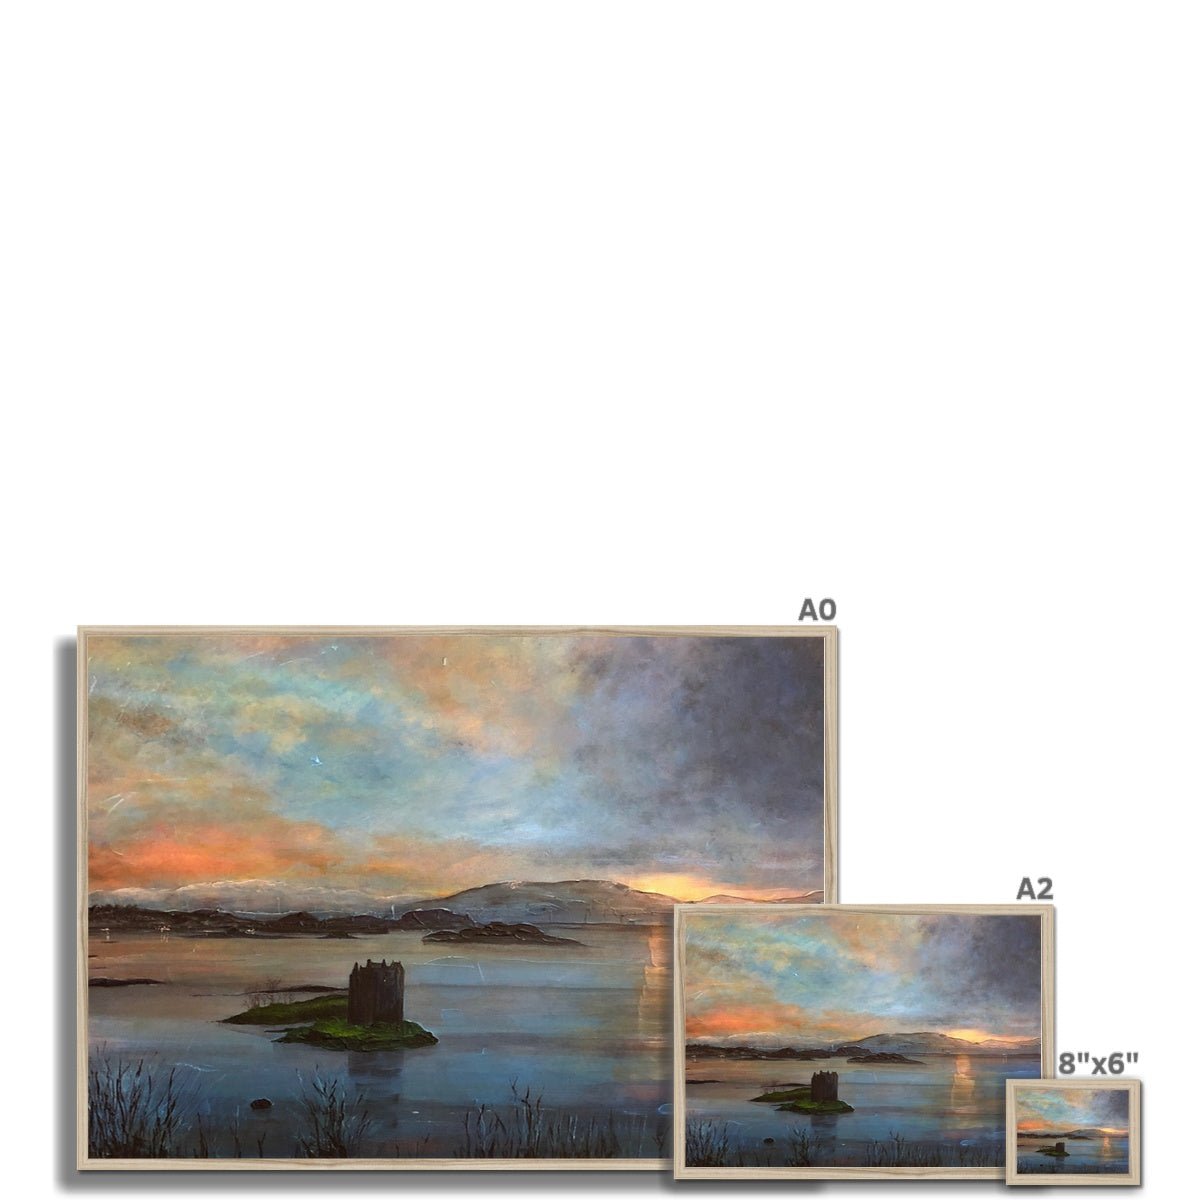 Castle Stalker Twilight Painting | Framed Prints From Scotland-Framed Prints-Historic & Iconic Scotland Art Gallery-Paintings, Prints, Homeware, Art Gifts From Scotland By Scottish Artist Kevin Hunter